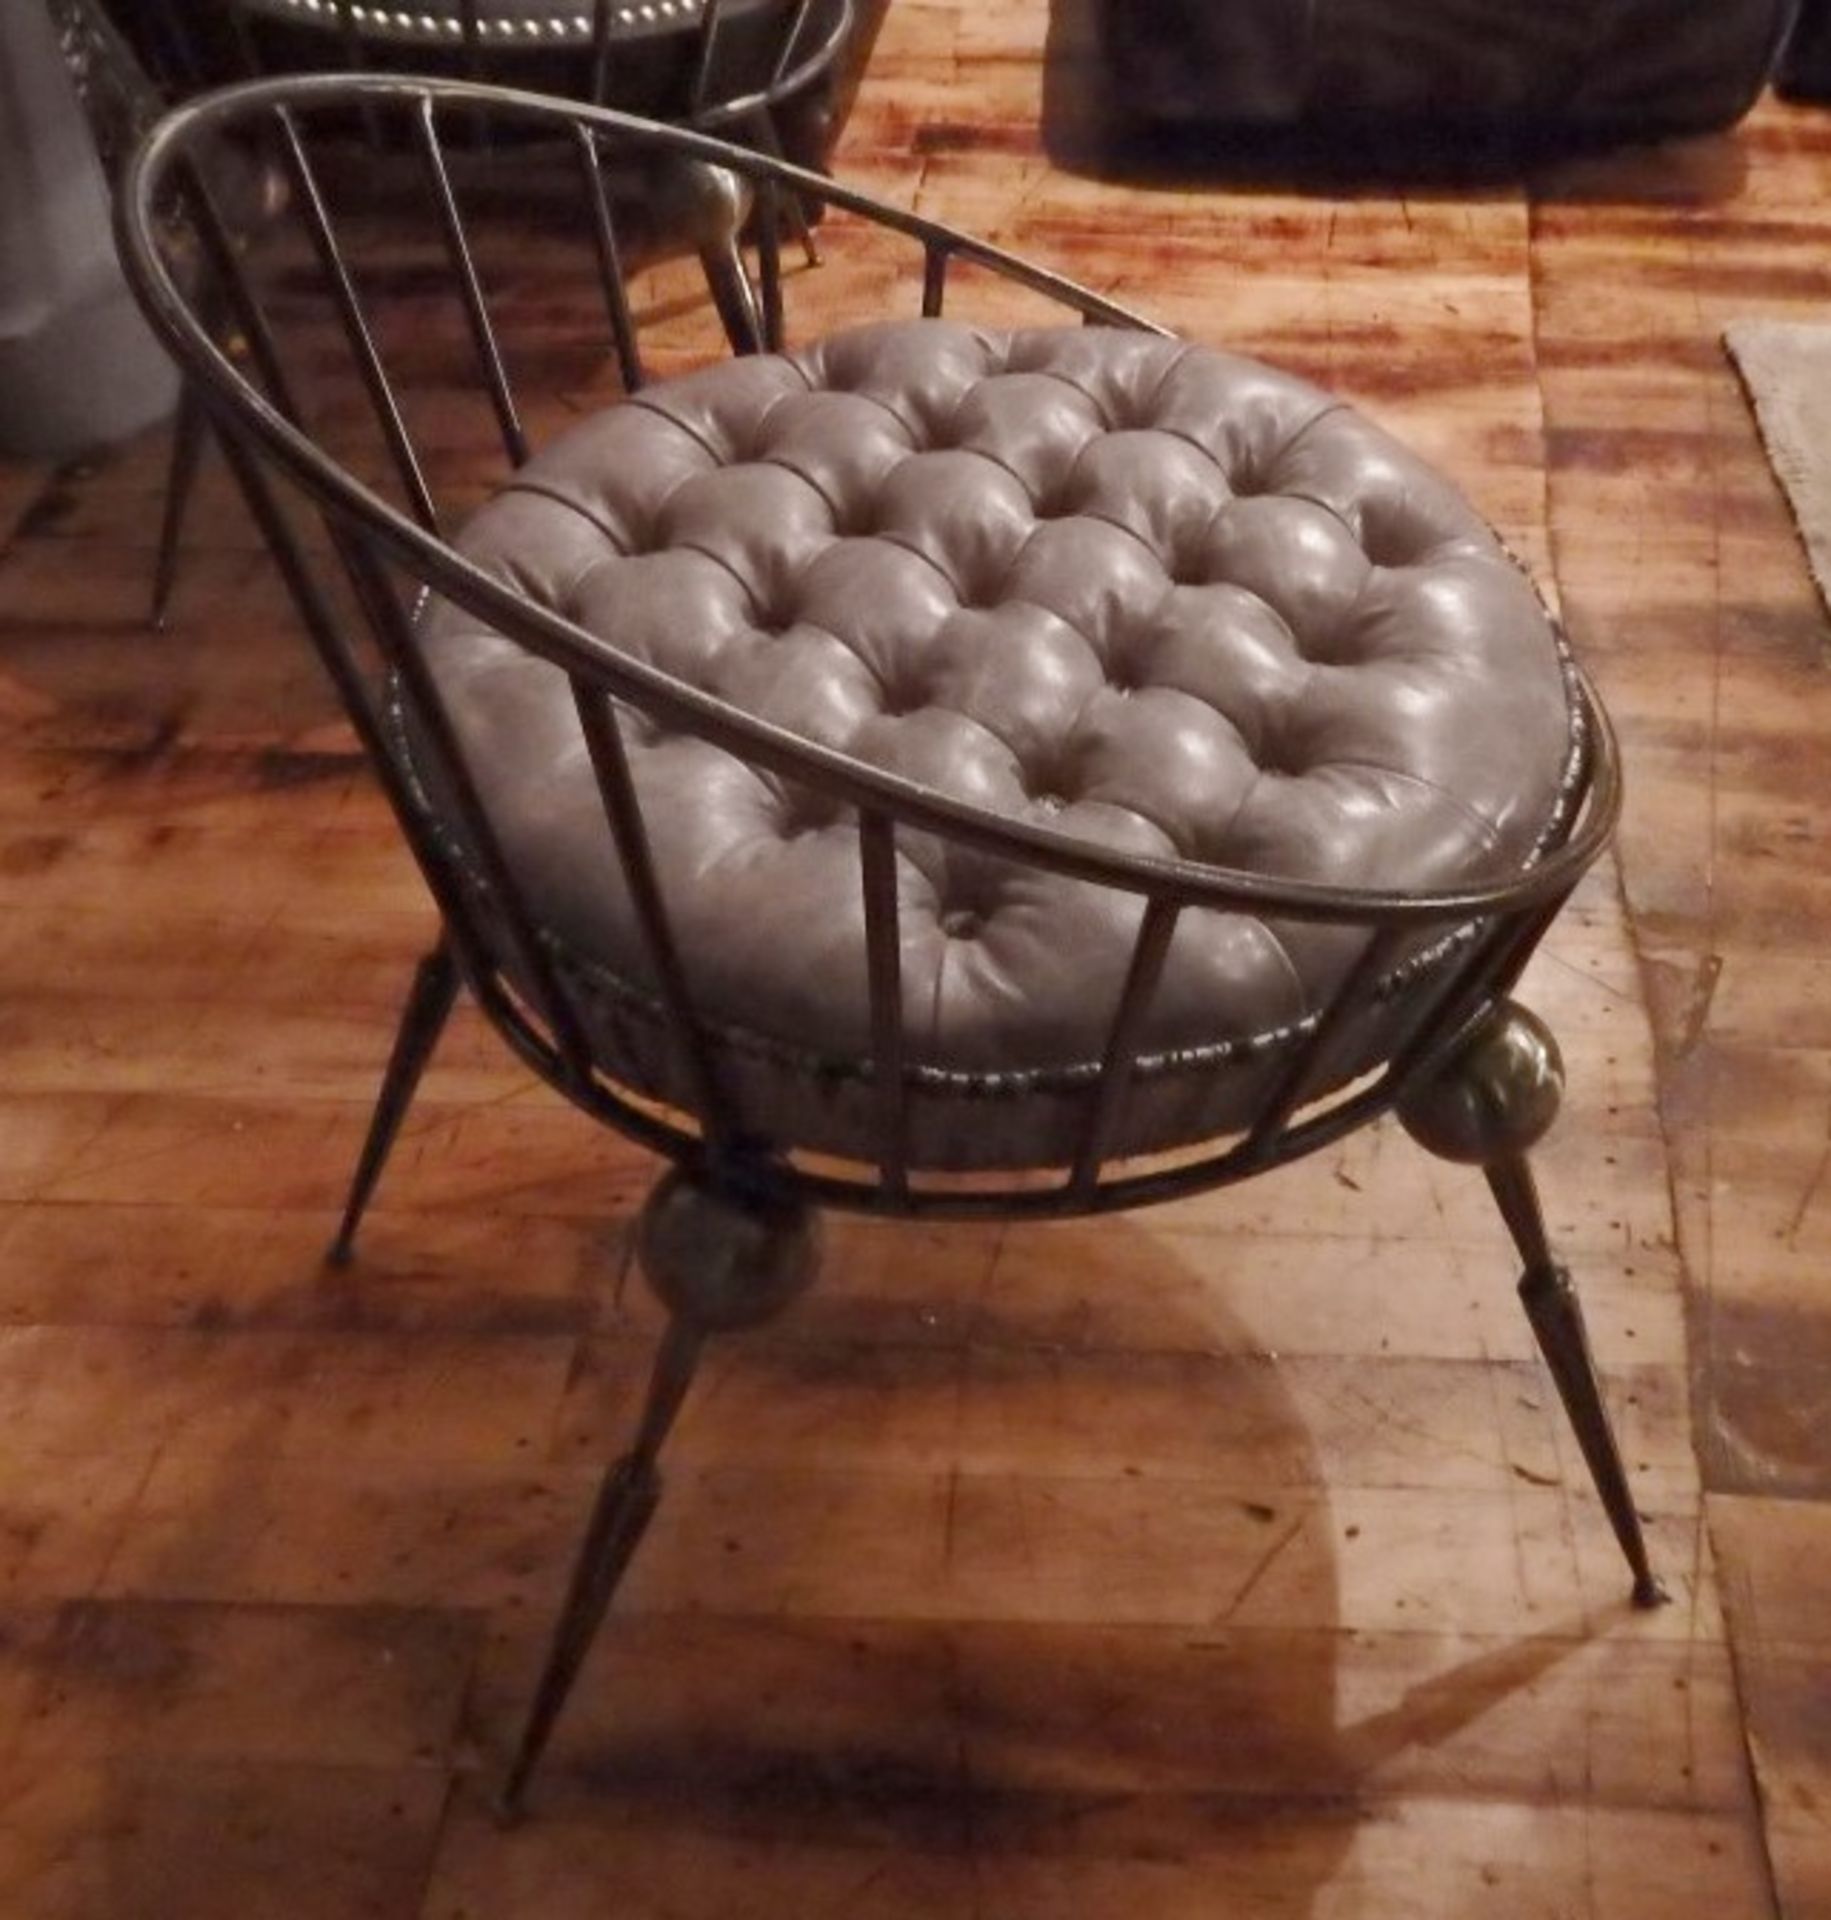 1 x Bespoke Handcrafted Chair - Unique Metal Framework With Leather Upholstered Cushion  - Colour: - Image 6 of 6